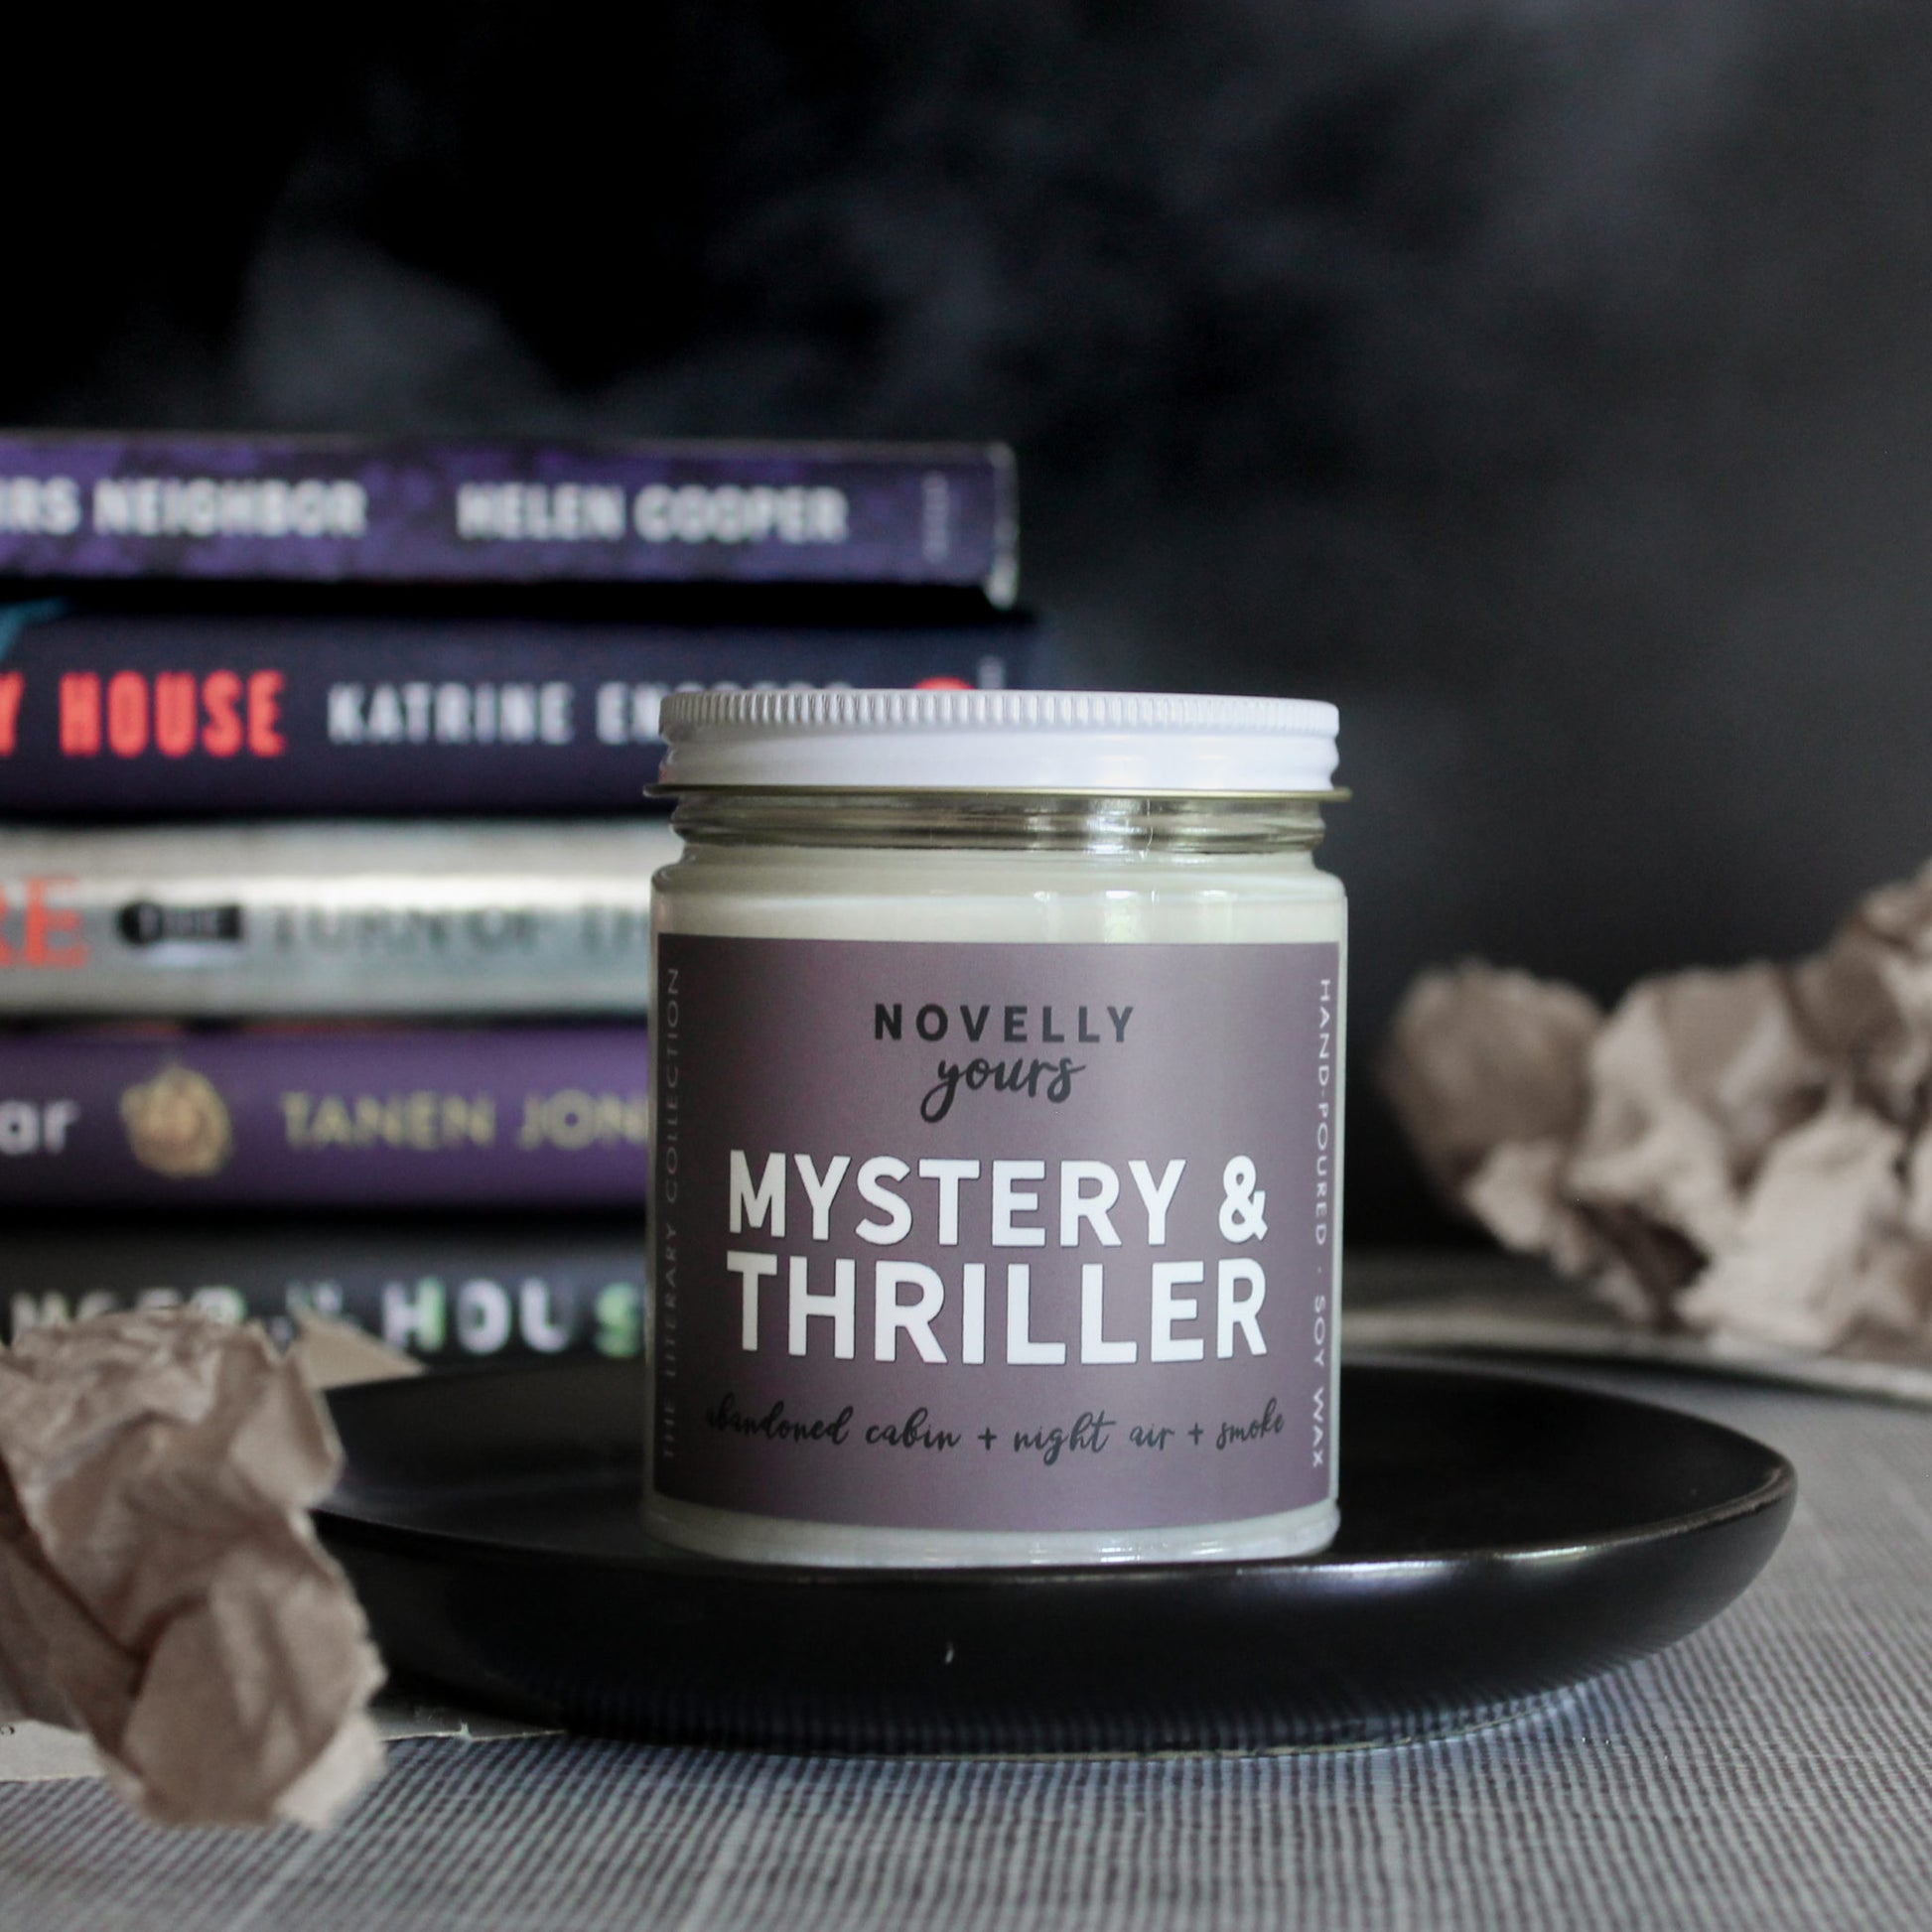 mystery & thriller scented soy wax candle with purple grey label and white lid sits on black round tray with paper accents and stack of thriller books in background